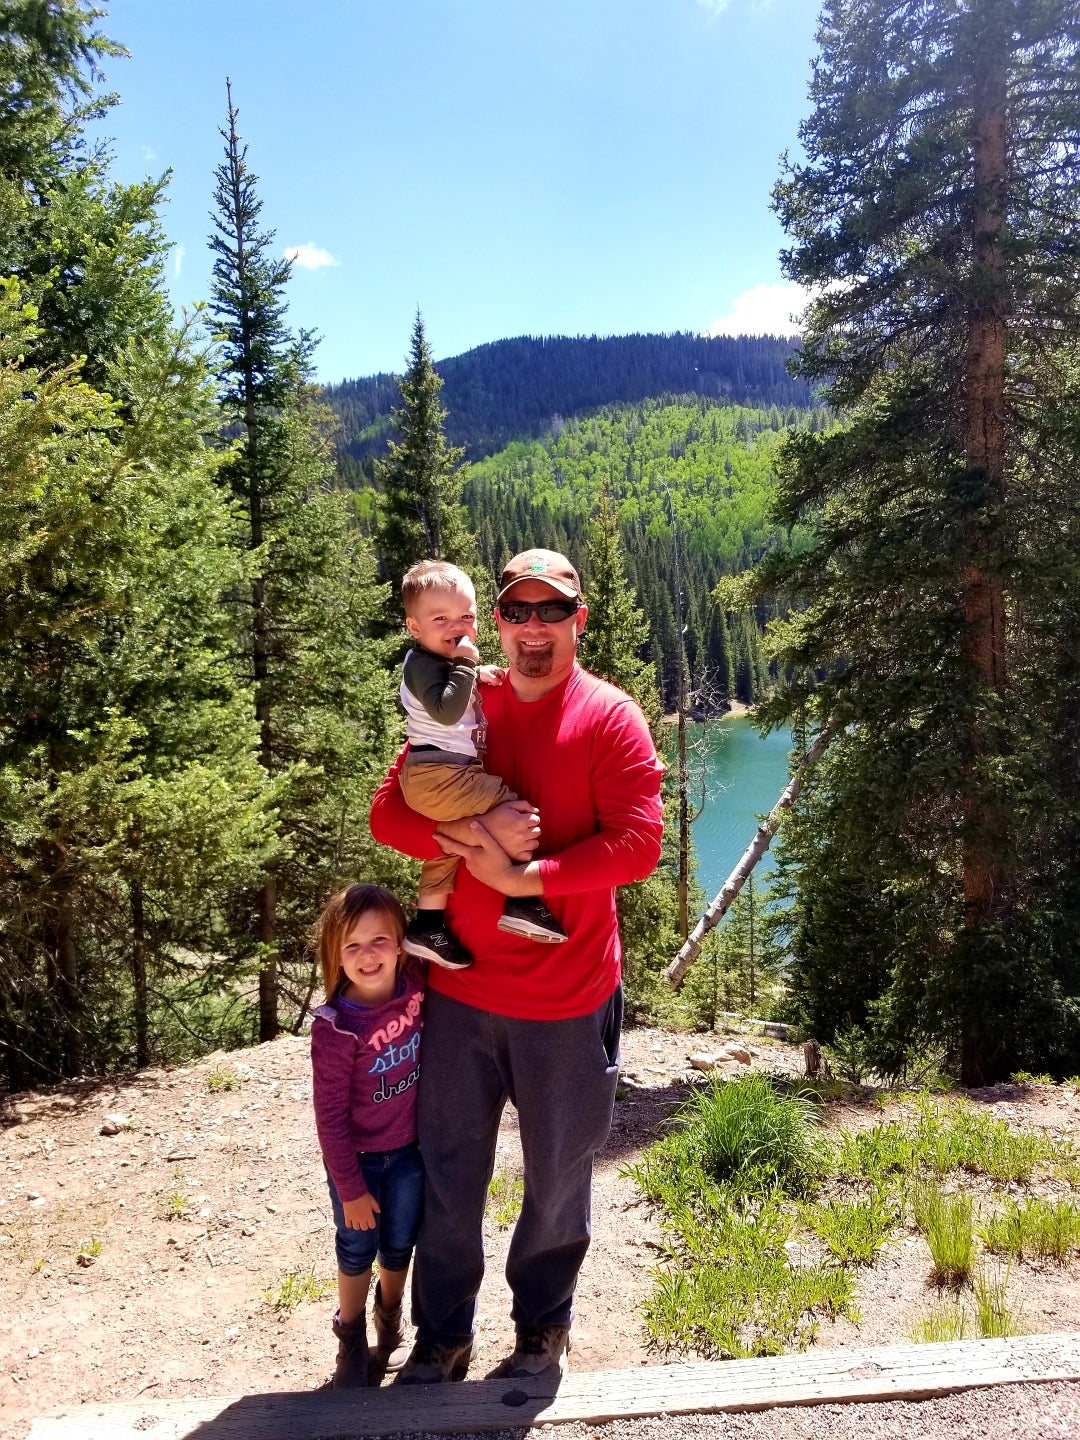 Camper submitted image from Anderson Meadow Campground (fishlake Nf, Ut) - 4